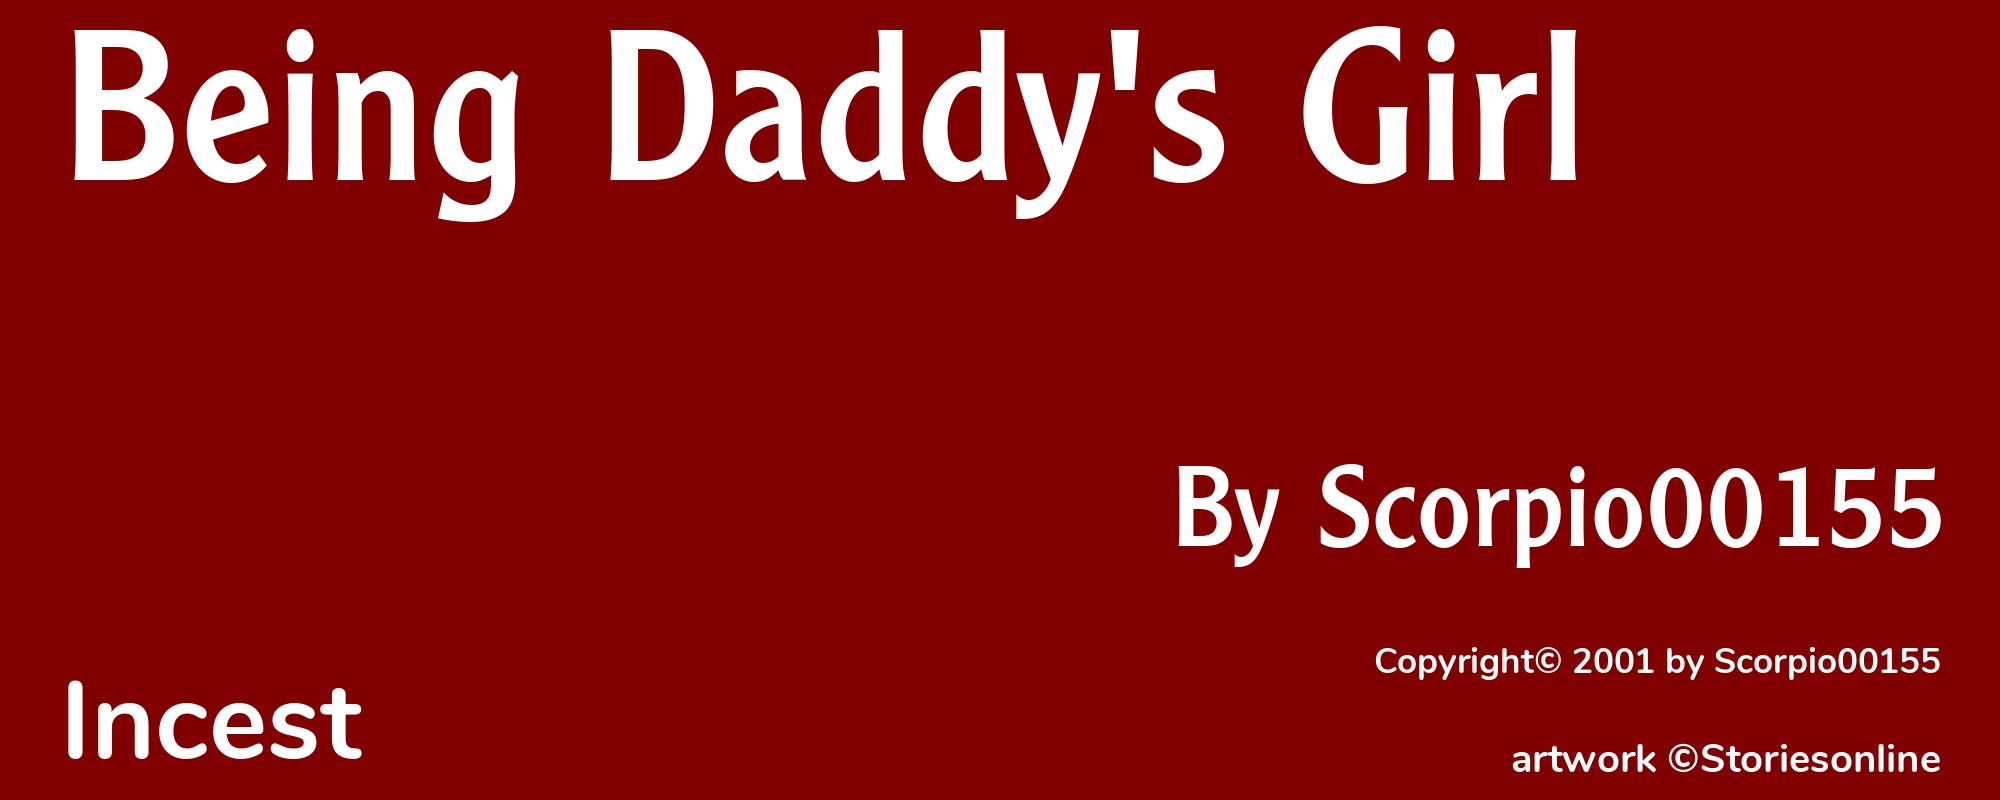 Being Daddy's Girl - Cover